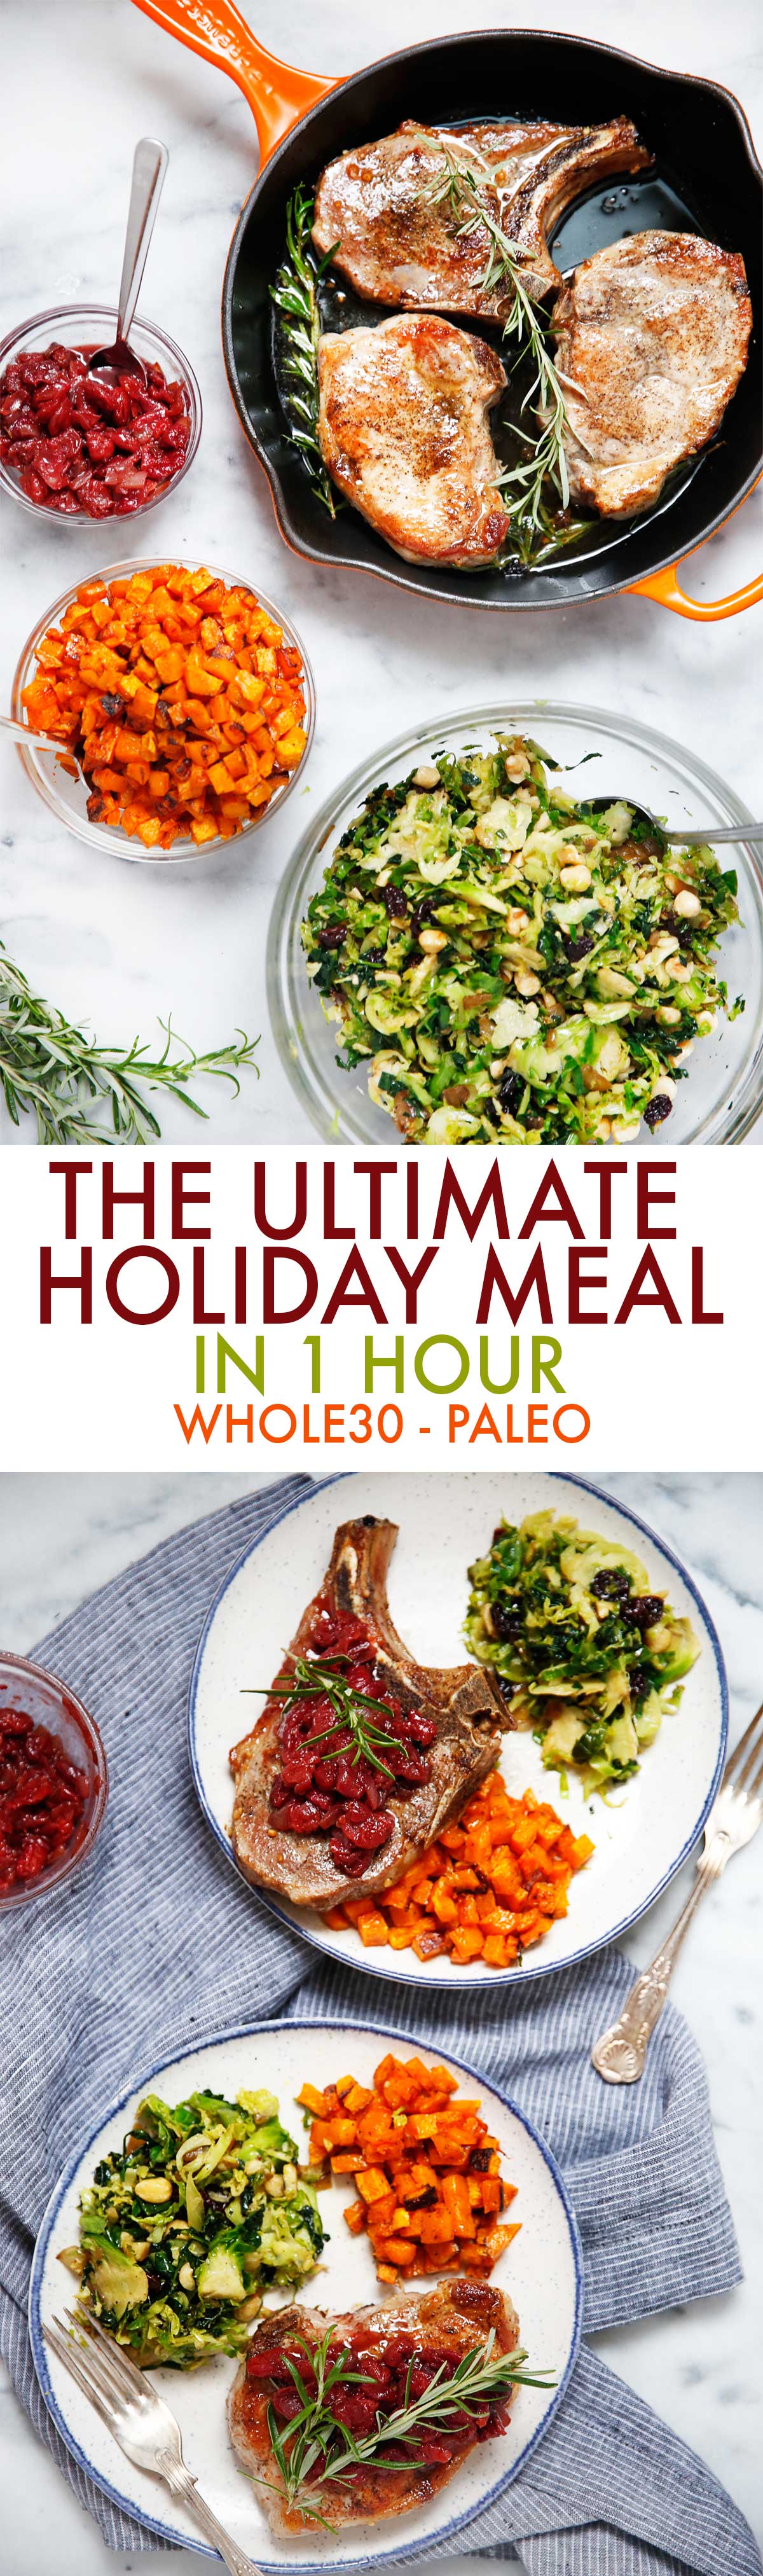 Your Holiday Dinner Menu (Made In 1 Hour) - Lexi's Clean Kitchen #paleo #glutenfree #cleaneating #holiday #dinner